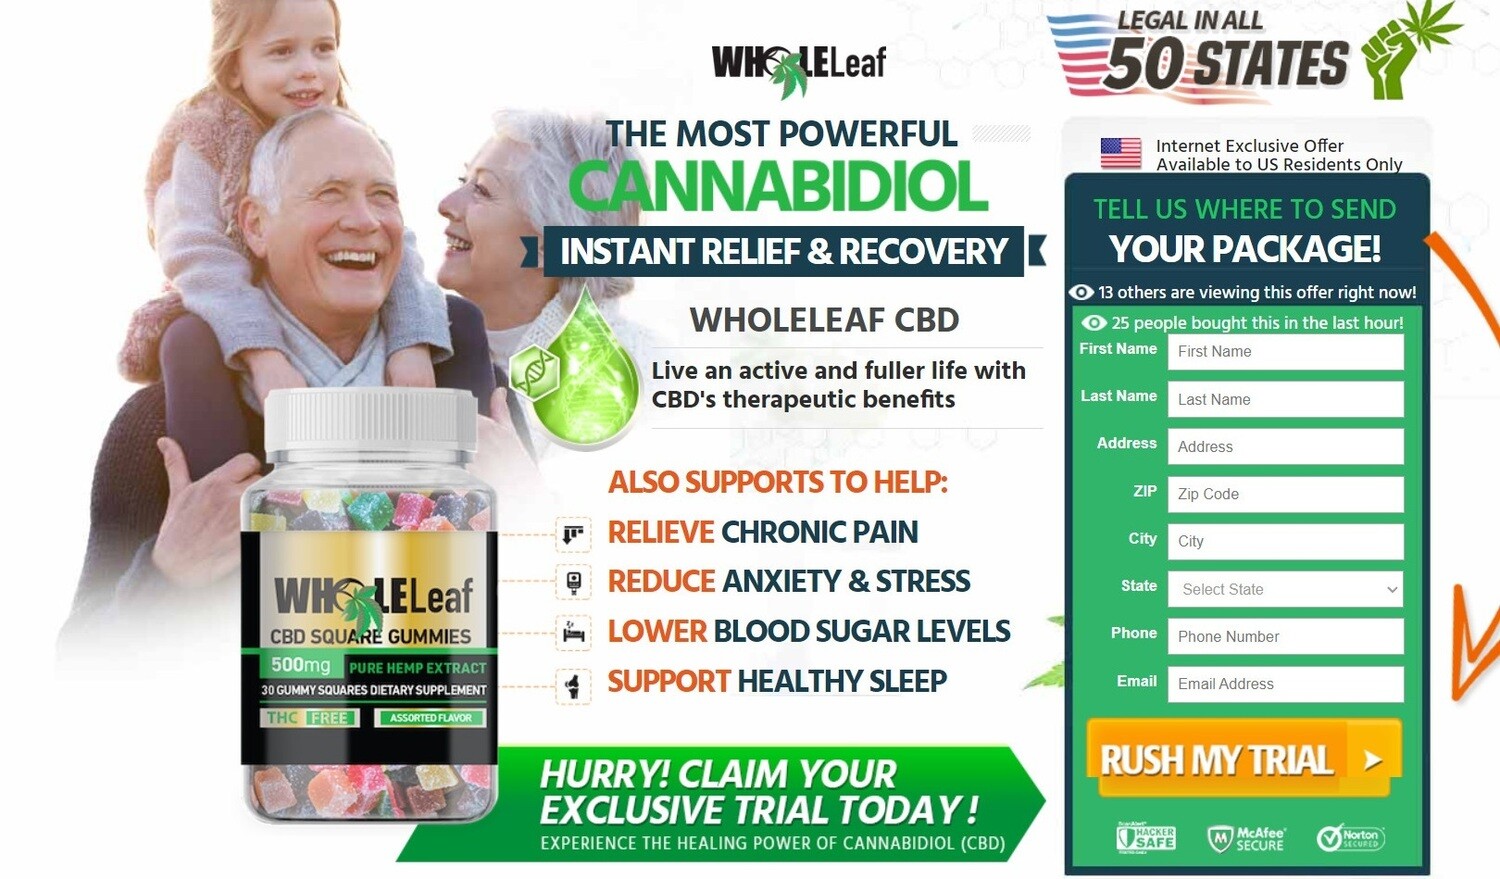 WholeLeaf CBD Gummies Introduction, Reviews & Offer Cost